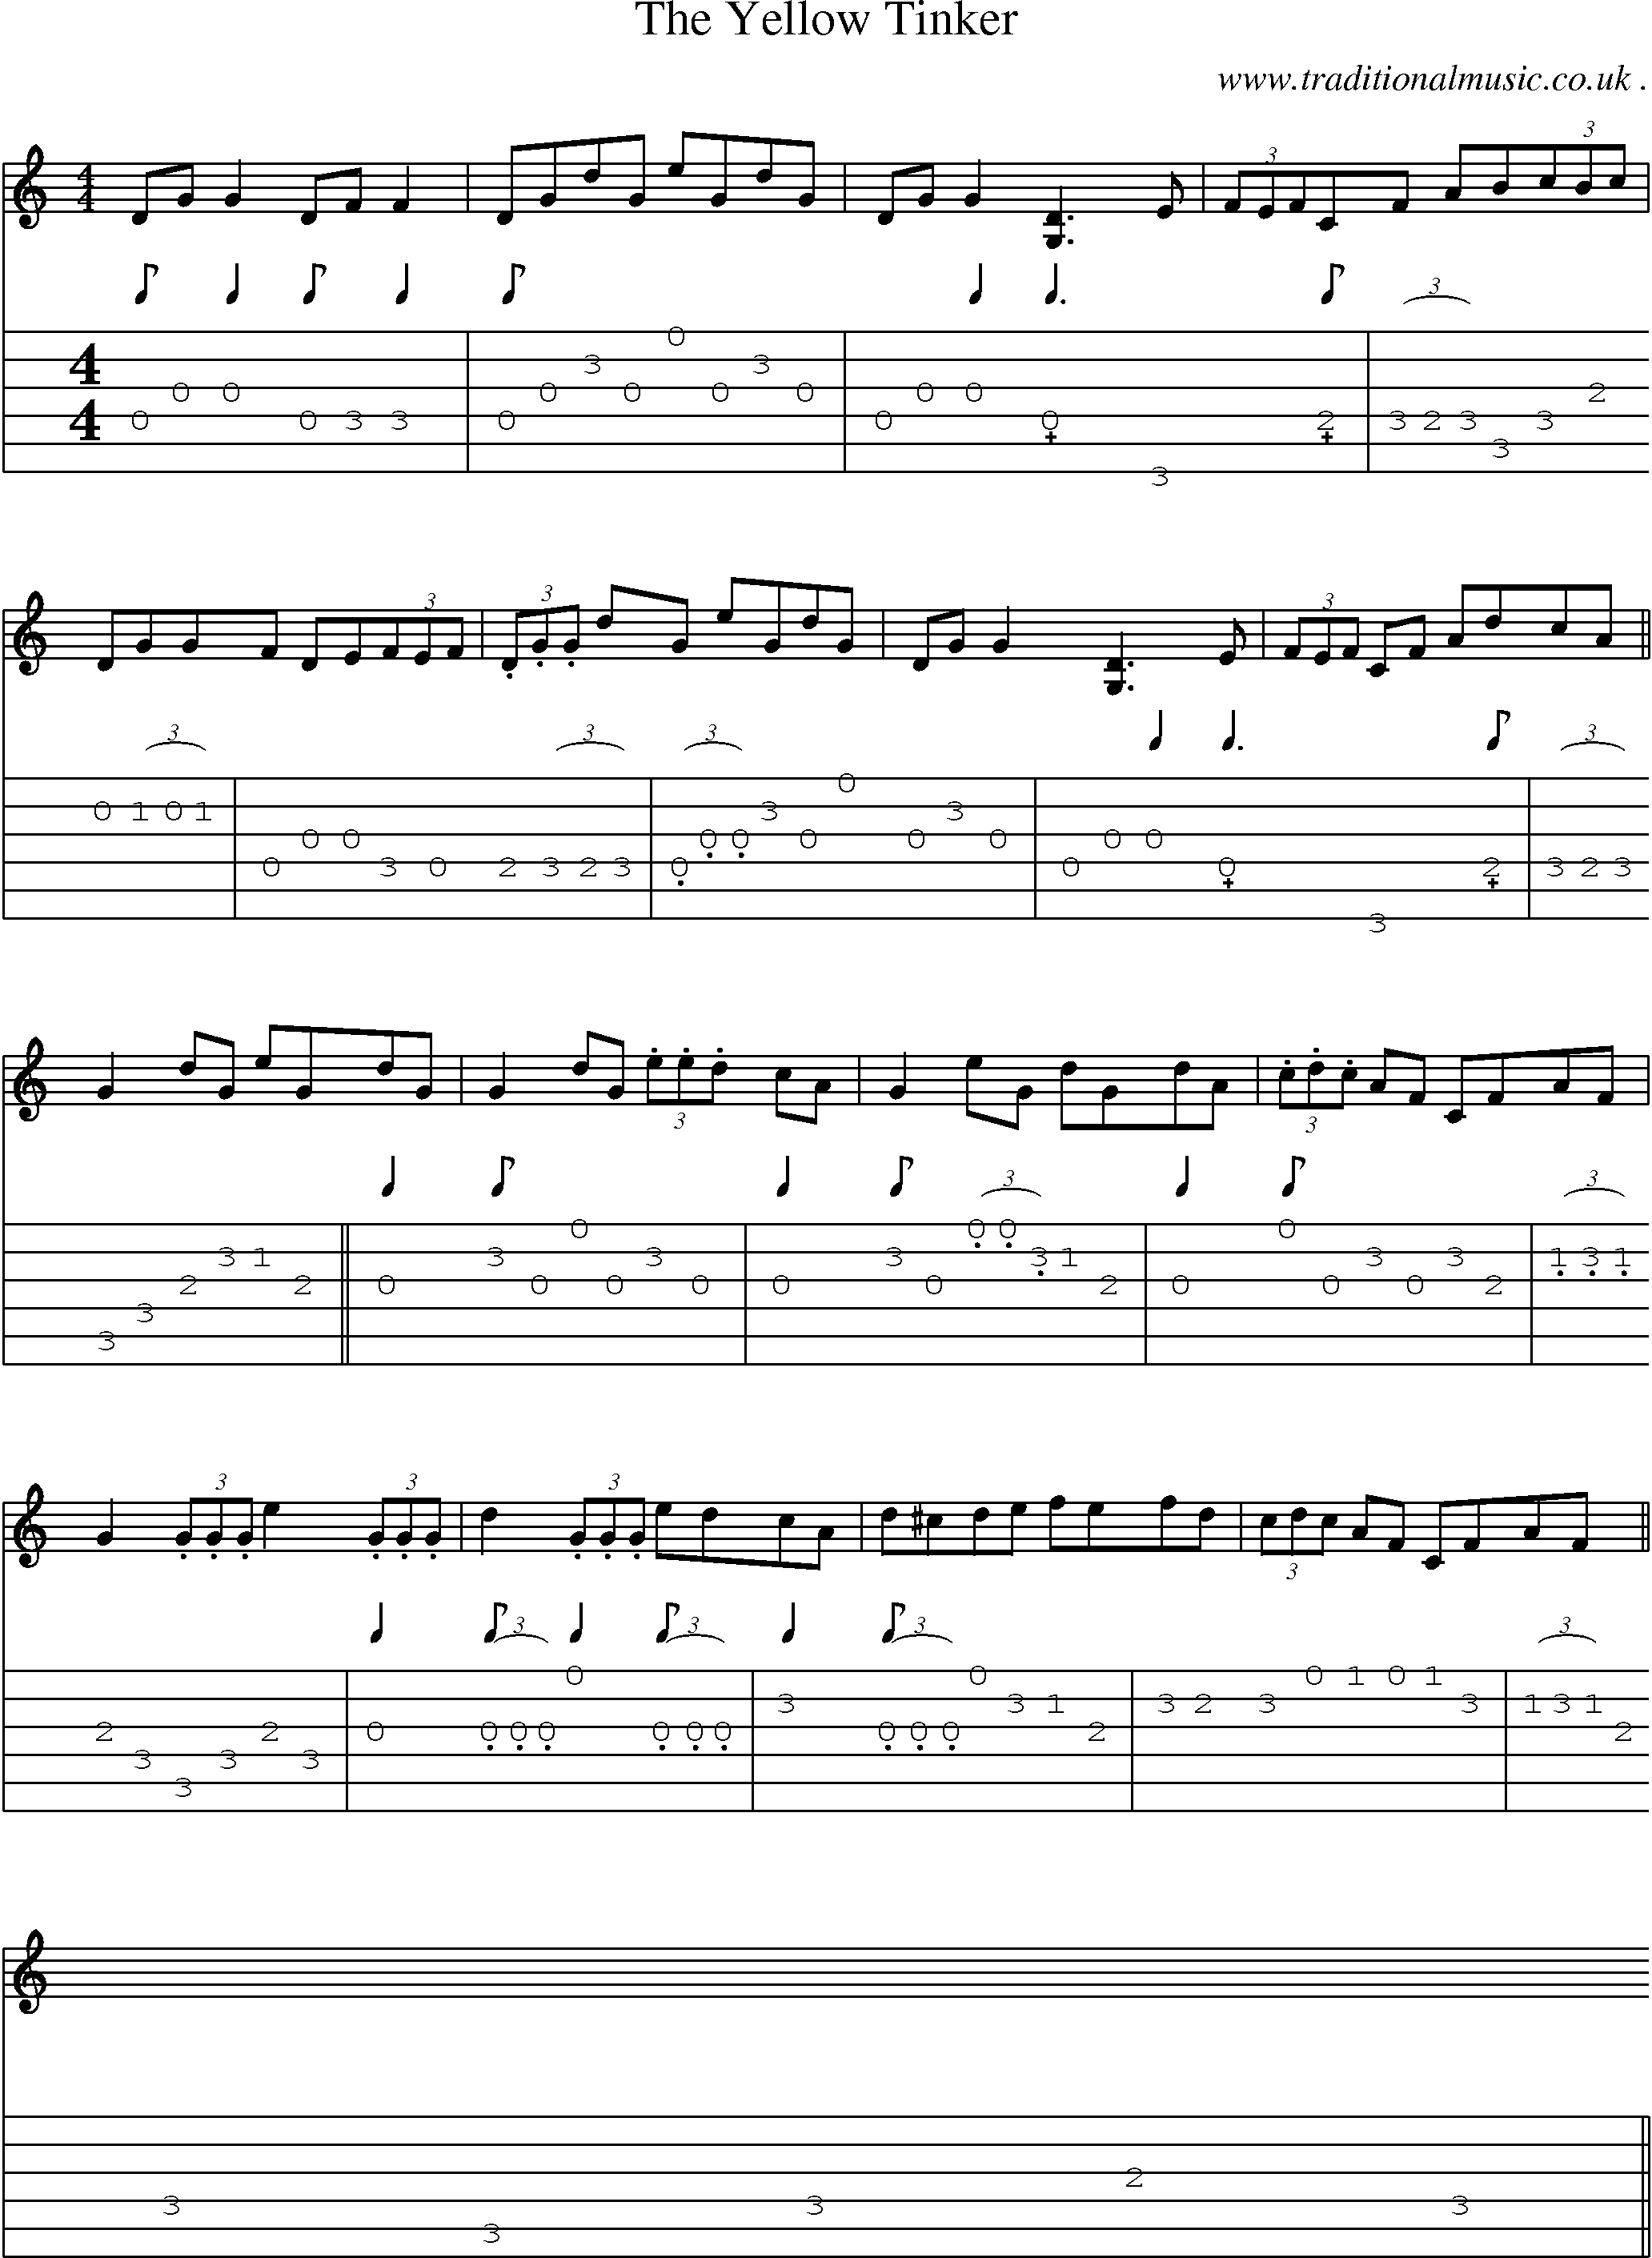 Sheet-Music and Guitar Tabs for The Yellow Tinker